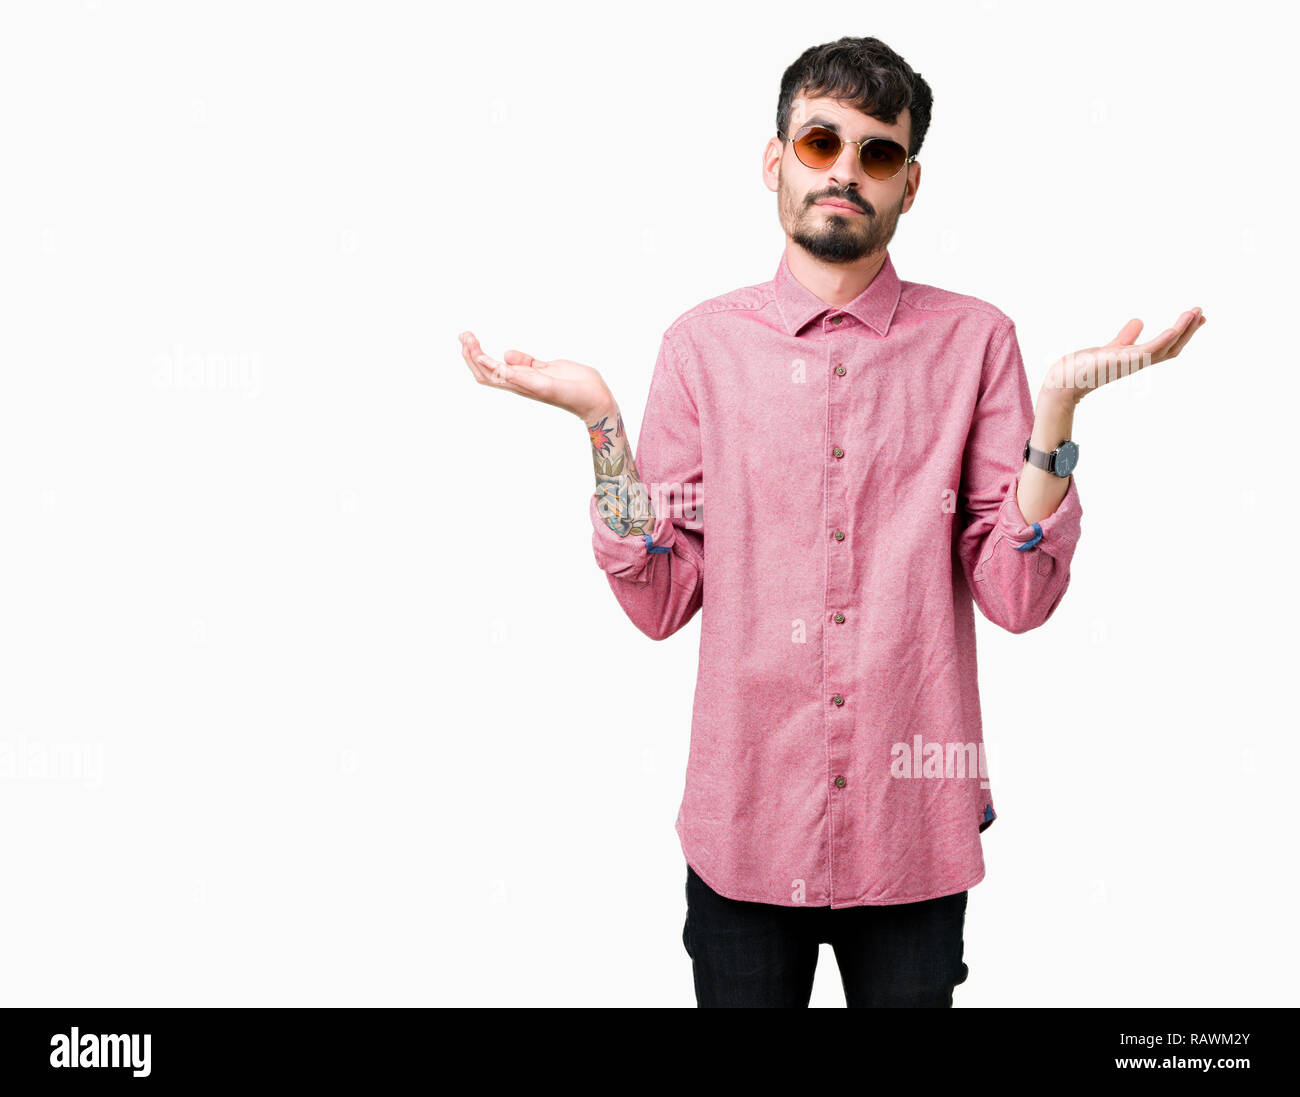 Young handsome man wearing sunglasses over isolated background clueless and confused expression with arms and hands raised. Doubt concept. Stock Photo